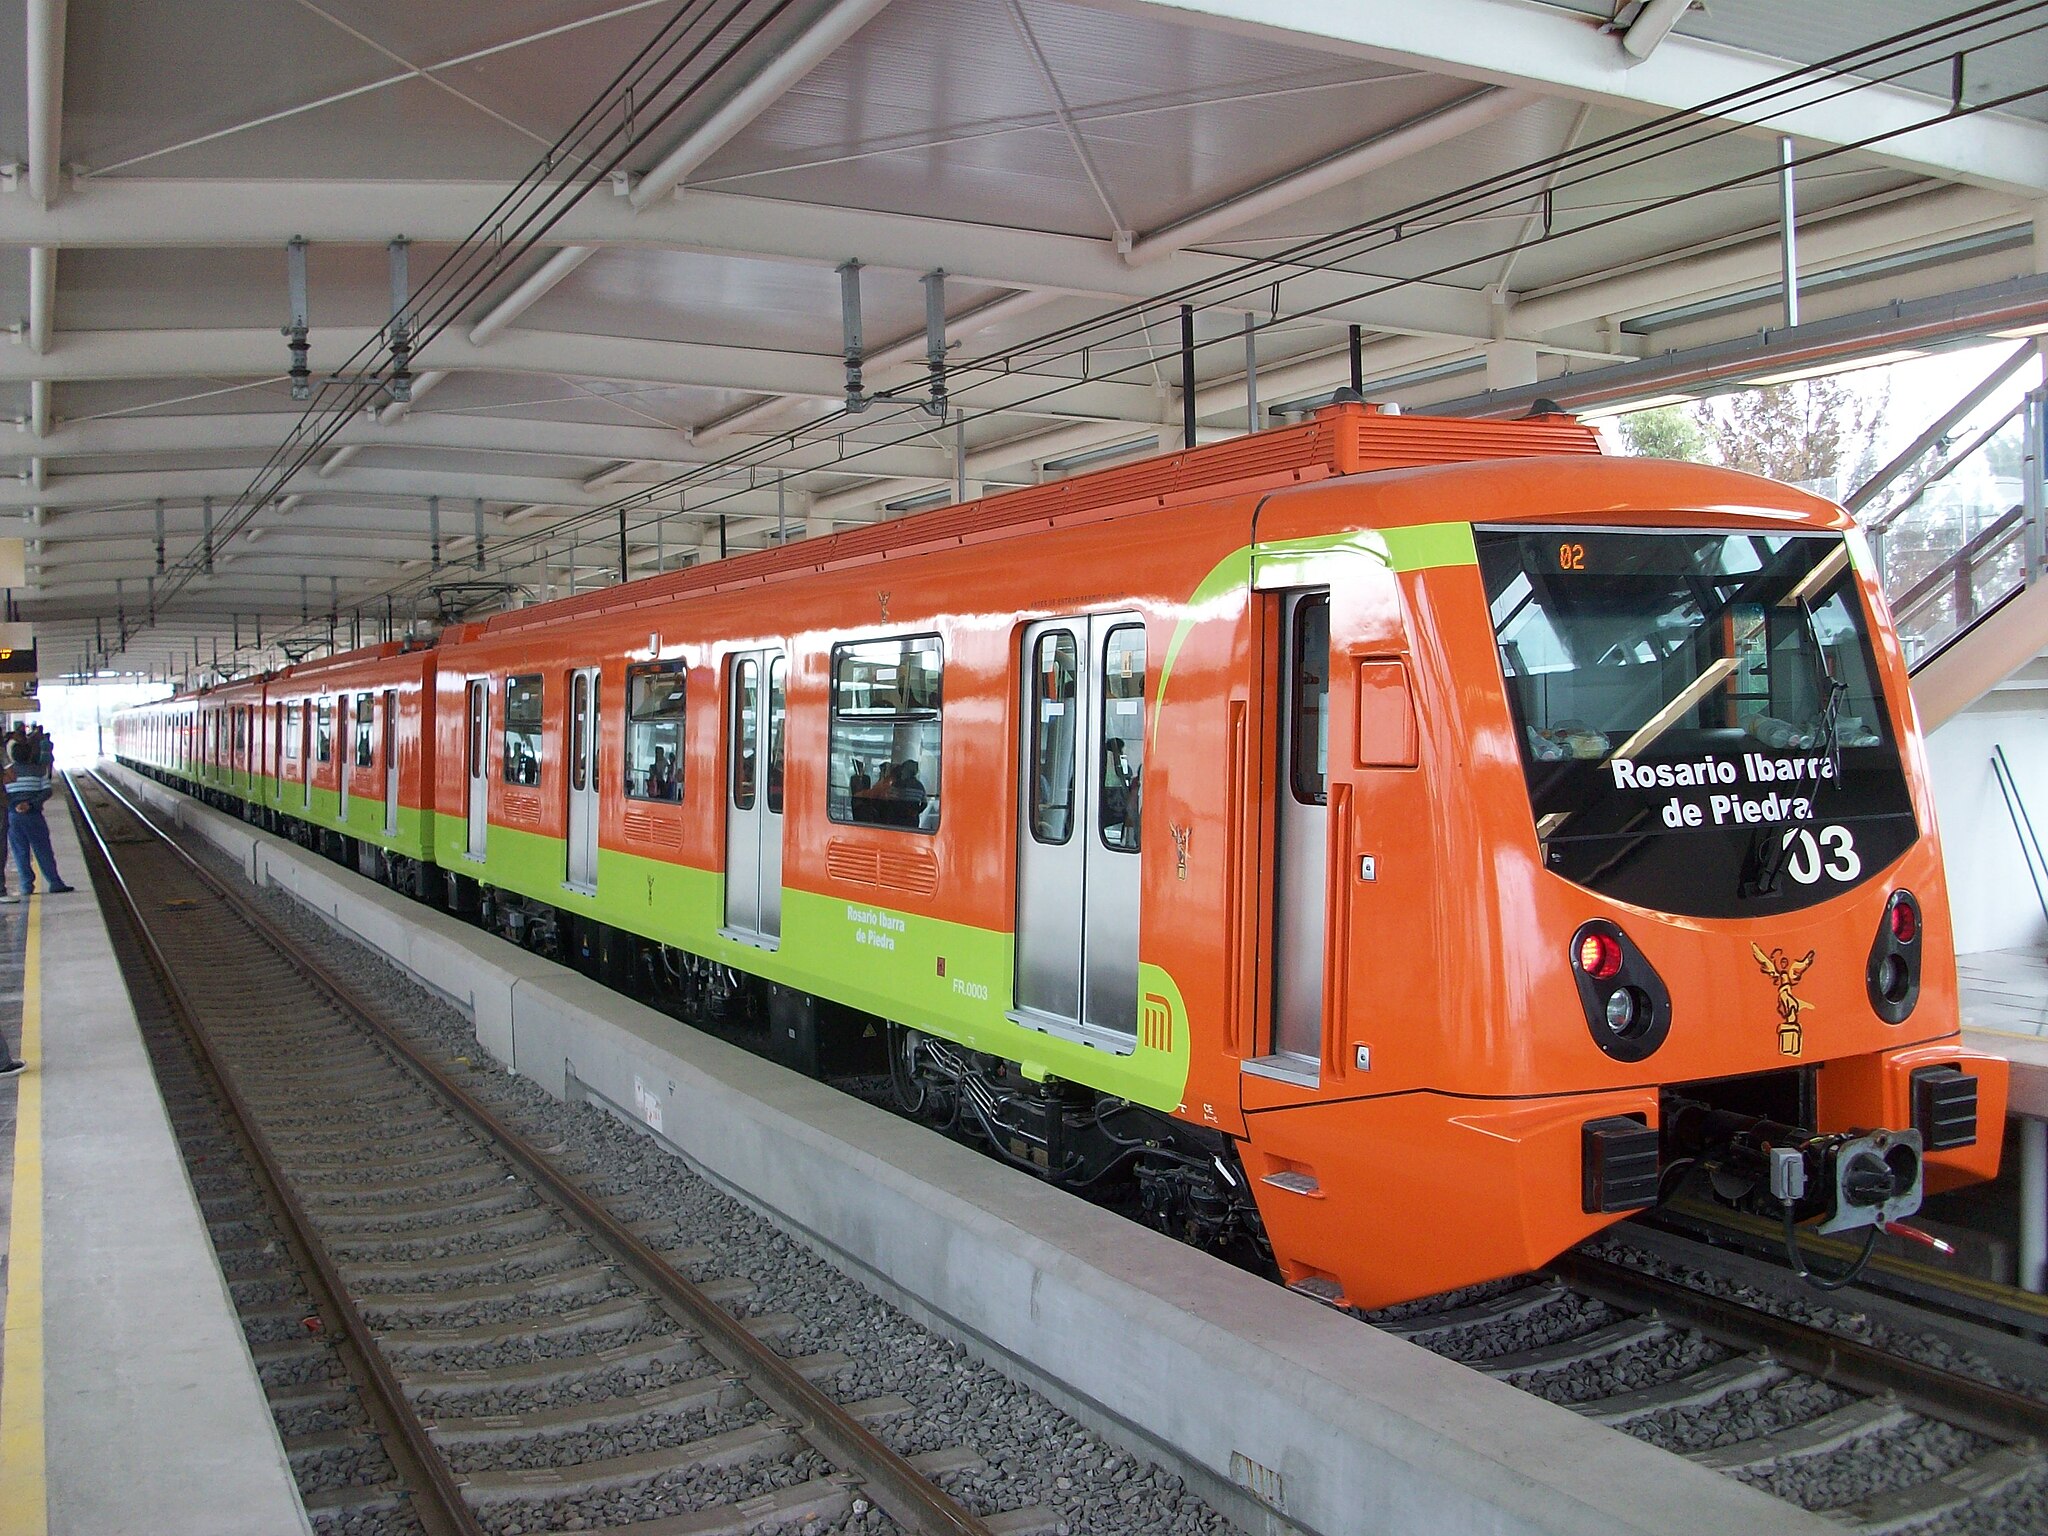 A file photo of the Mexico City Metro. Source: GAED, CC BY-SA 3.0 <https://creativecommons.org/licenses/by-sa/3.0>, via Wikimedia Commons